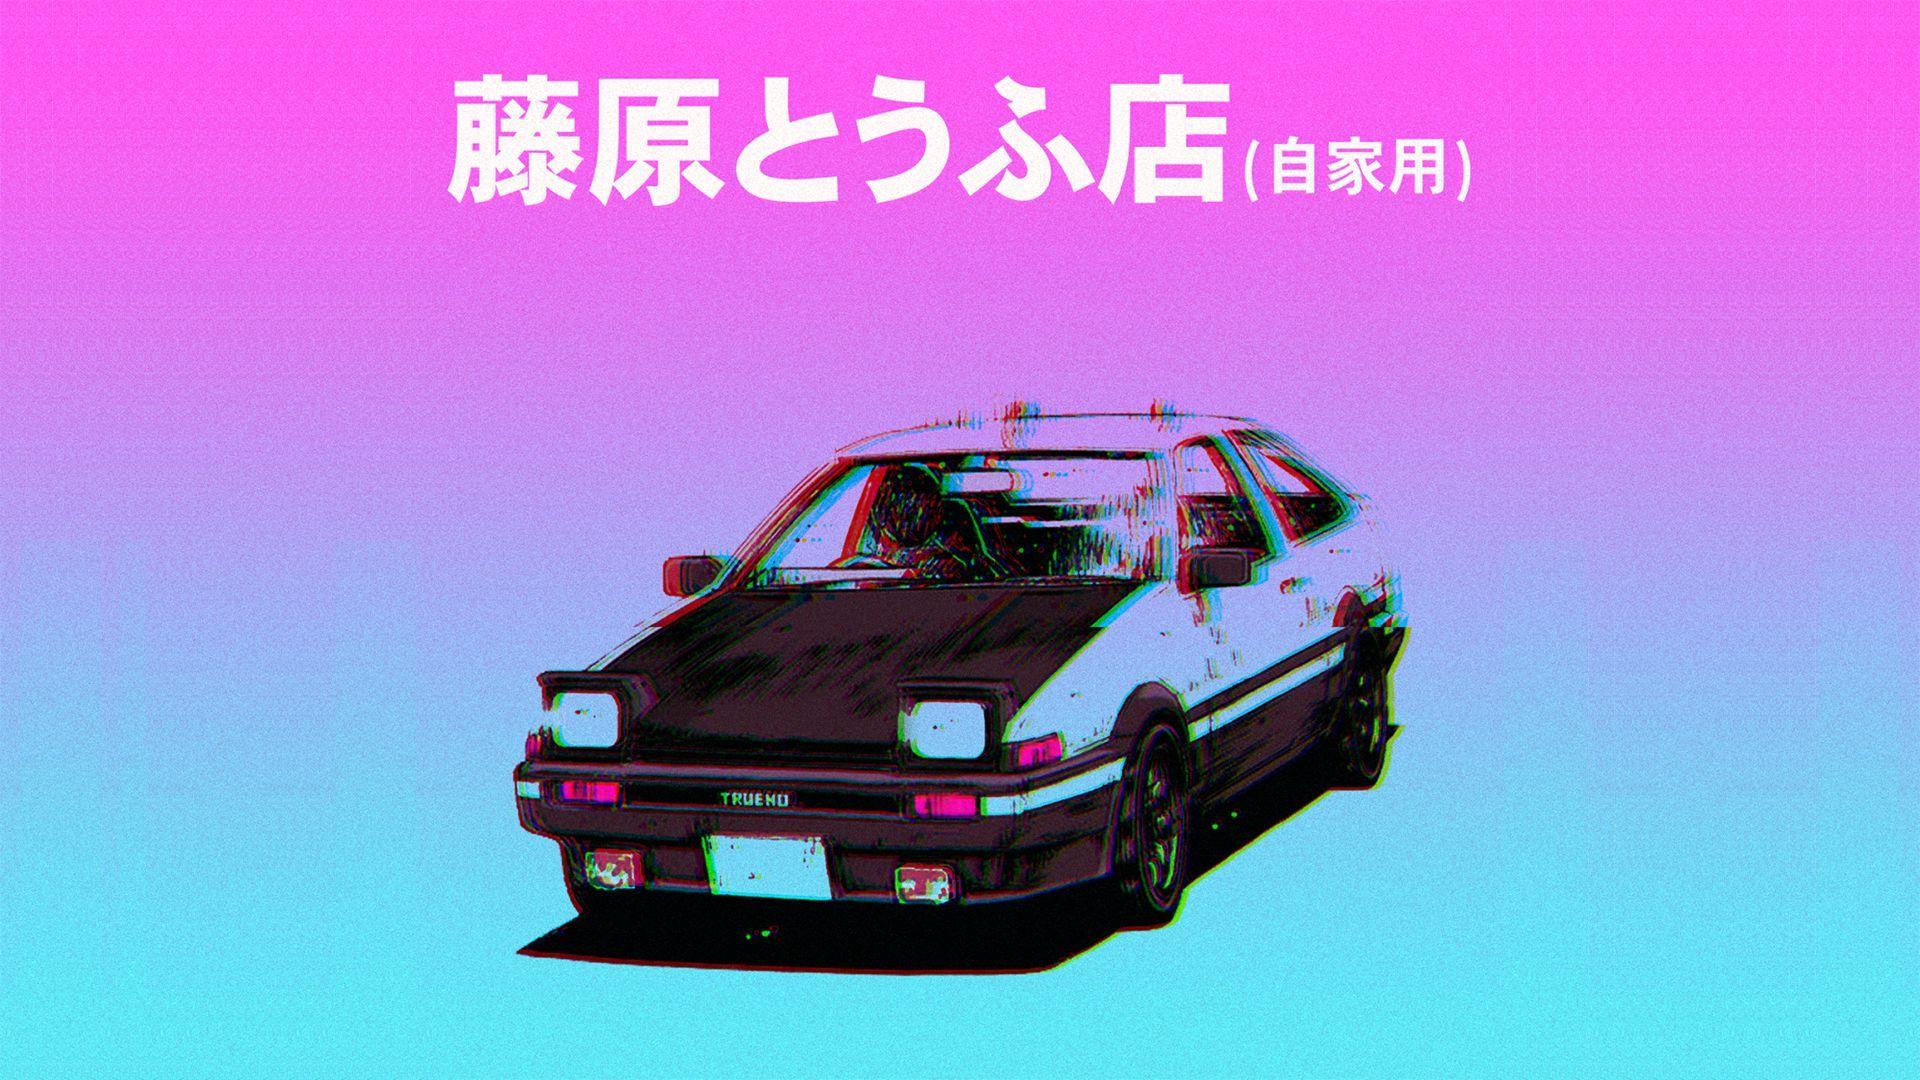 car, glitch art, Japanese characters, Initial D, pink, cyanx1080 Wallpaper